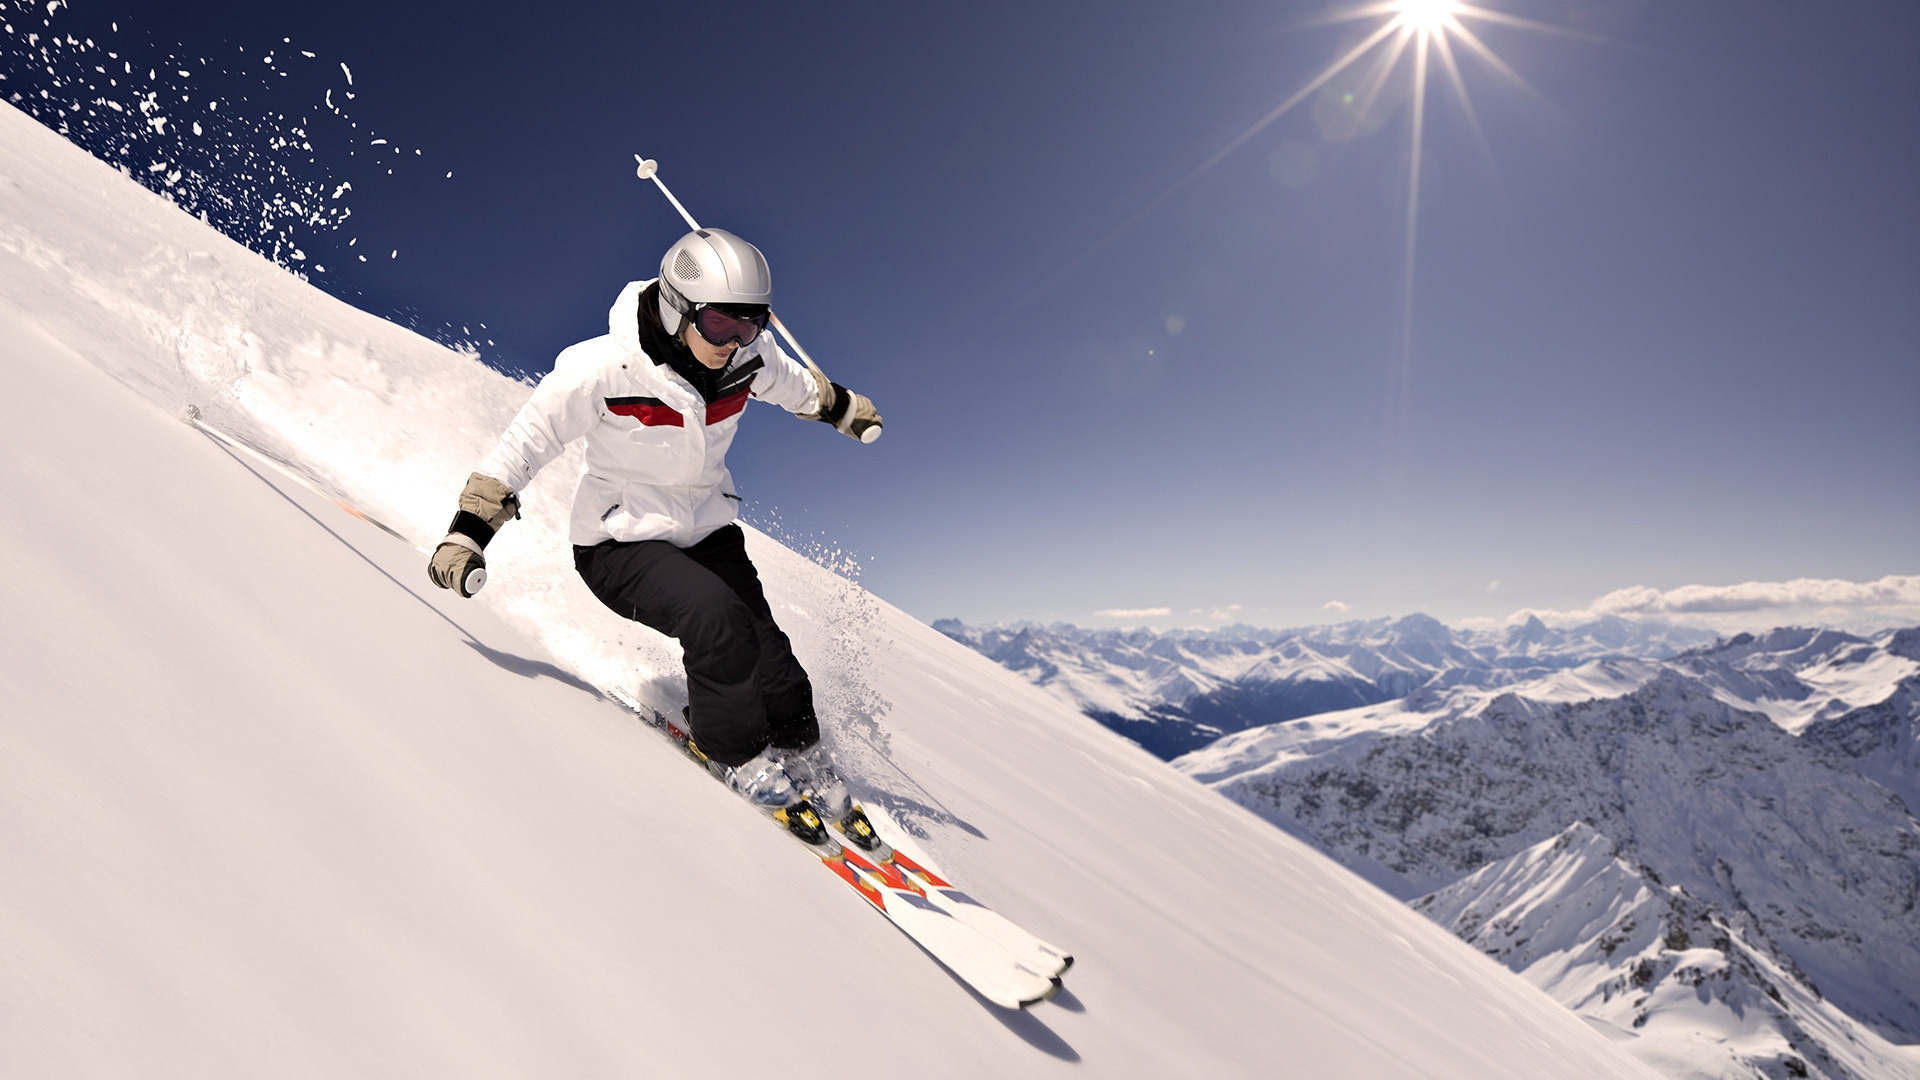 Skiing High for 1920 x 1080 HDTV 1080p resolution